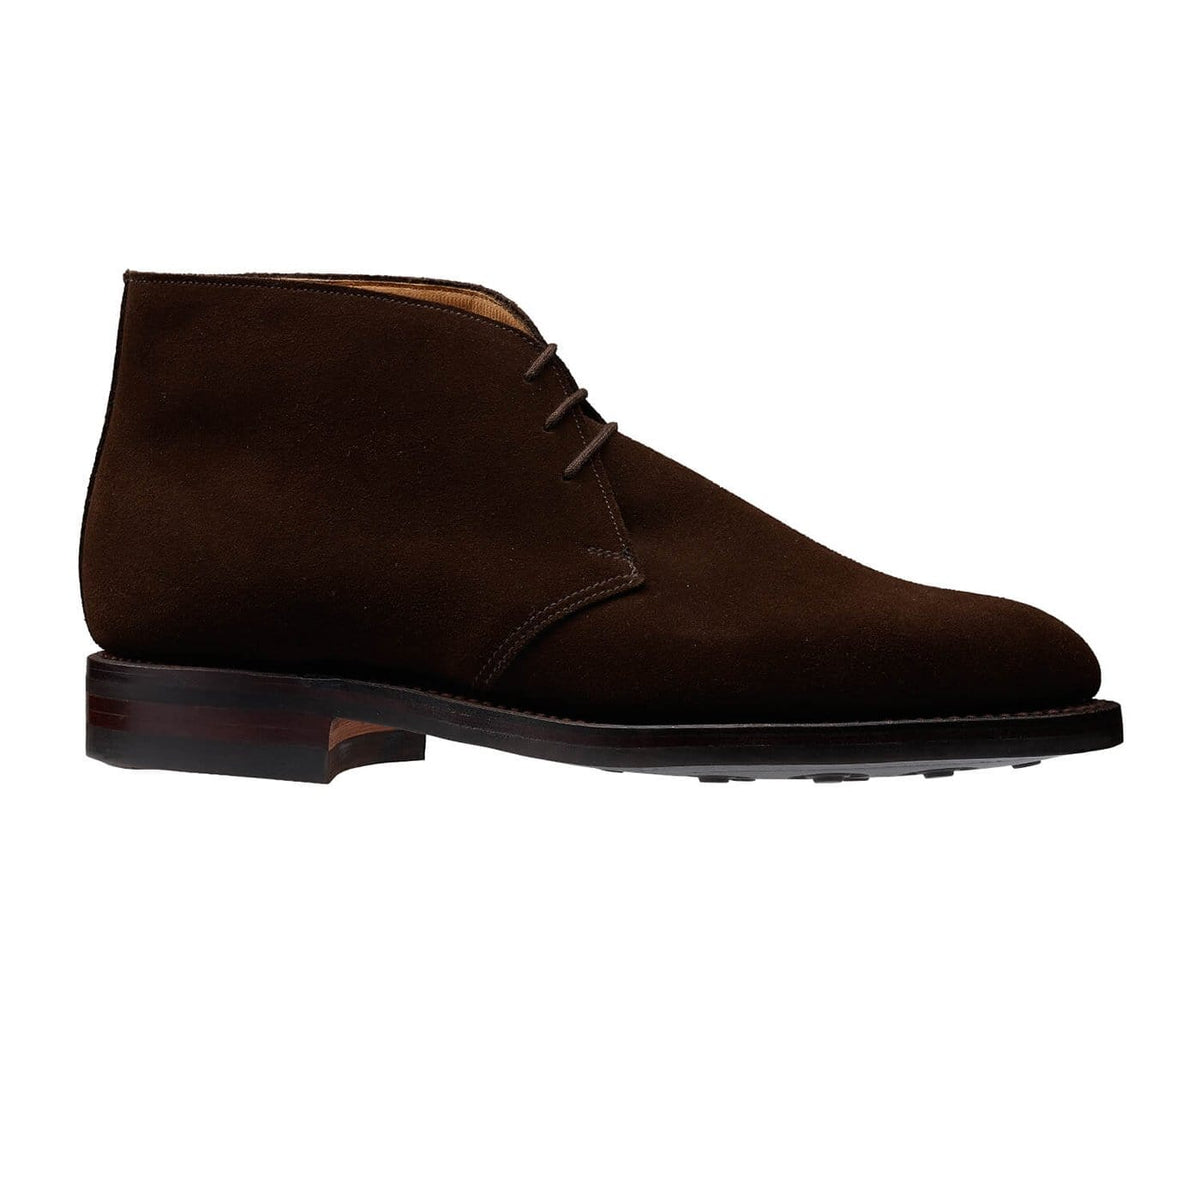 Crockett & Jones Chiltern 8236rs Dark Brown Suede Chukka Boots Colou for Men Mens Shoes Boots Chukka boots and desert boots 